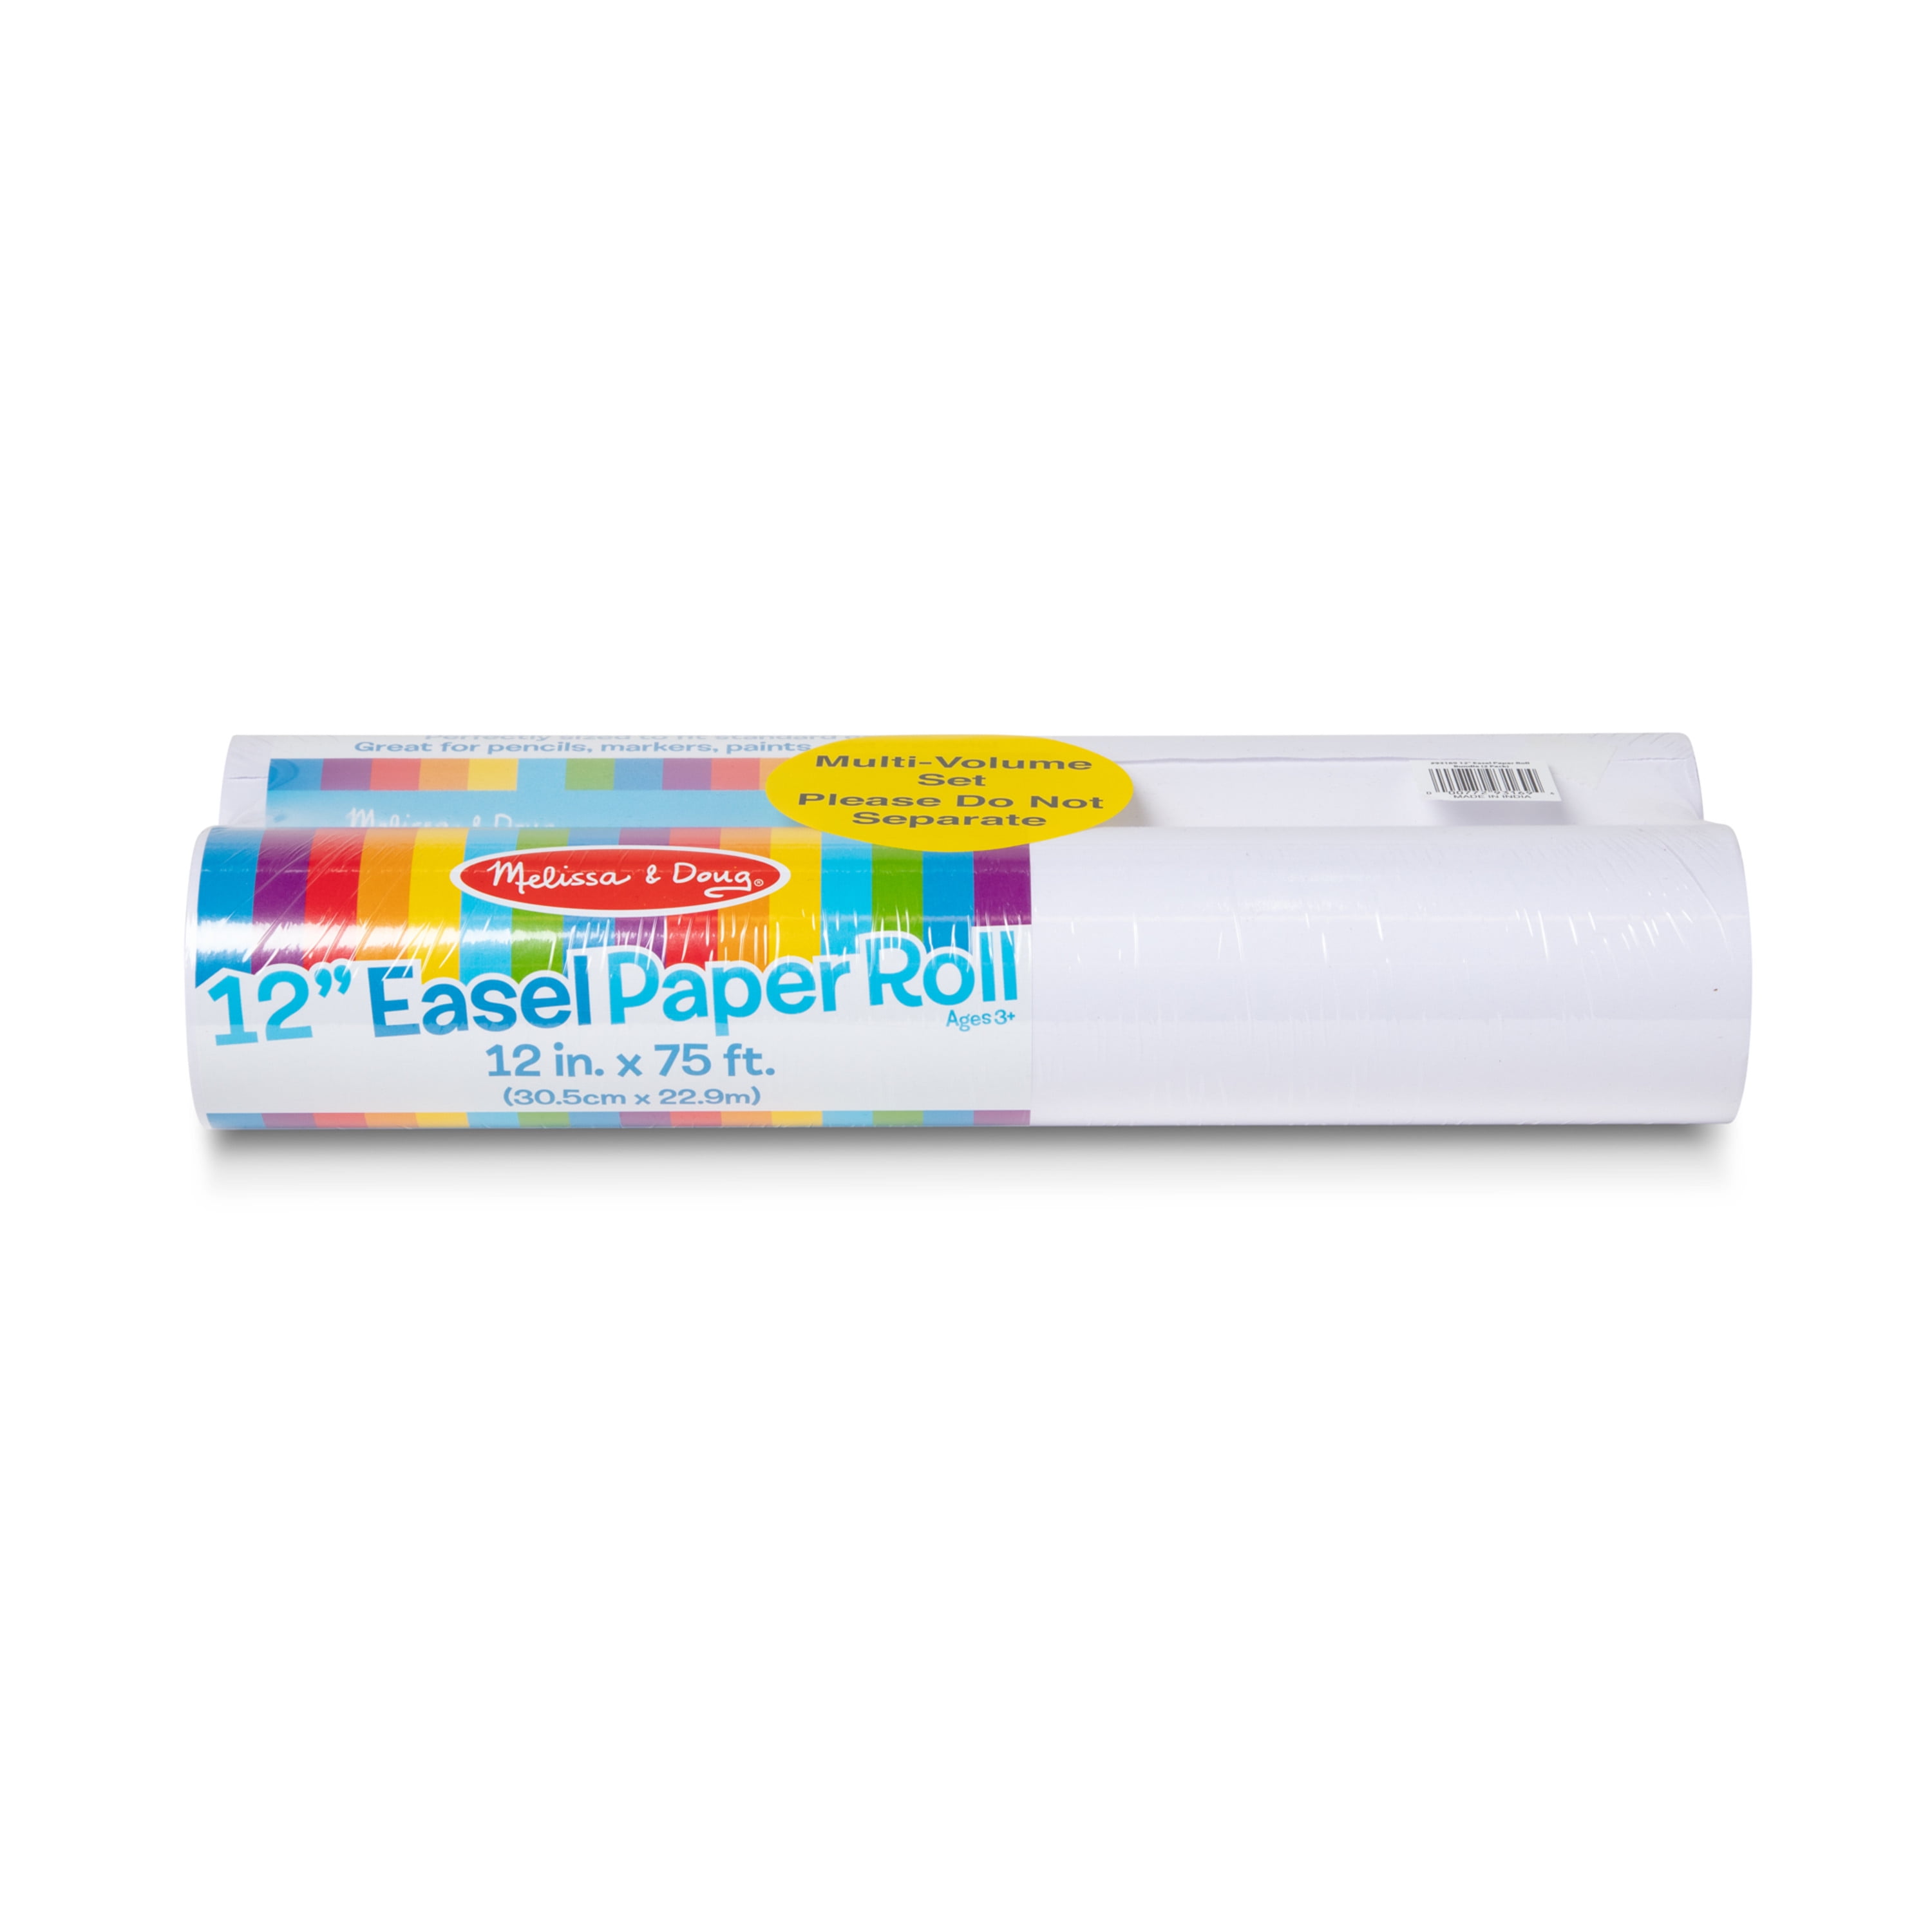 Melissa and Doug Tabletop Easel Paper Roll 12 x 75ft - White - New